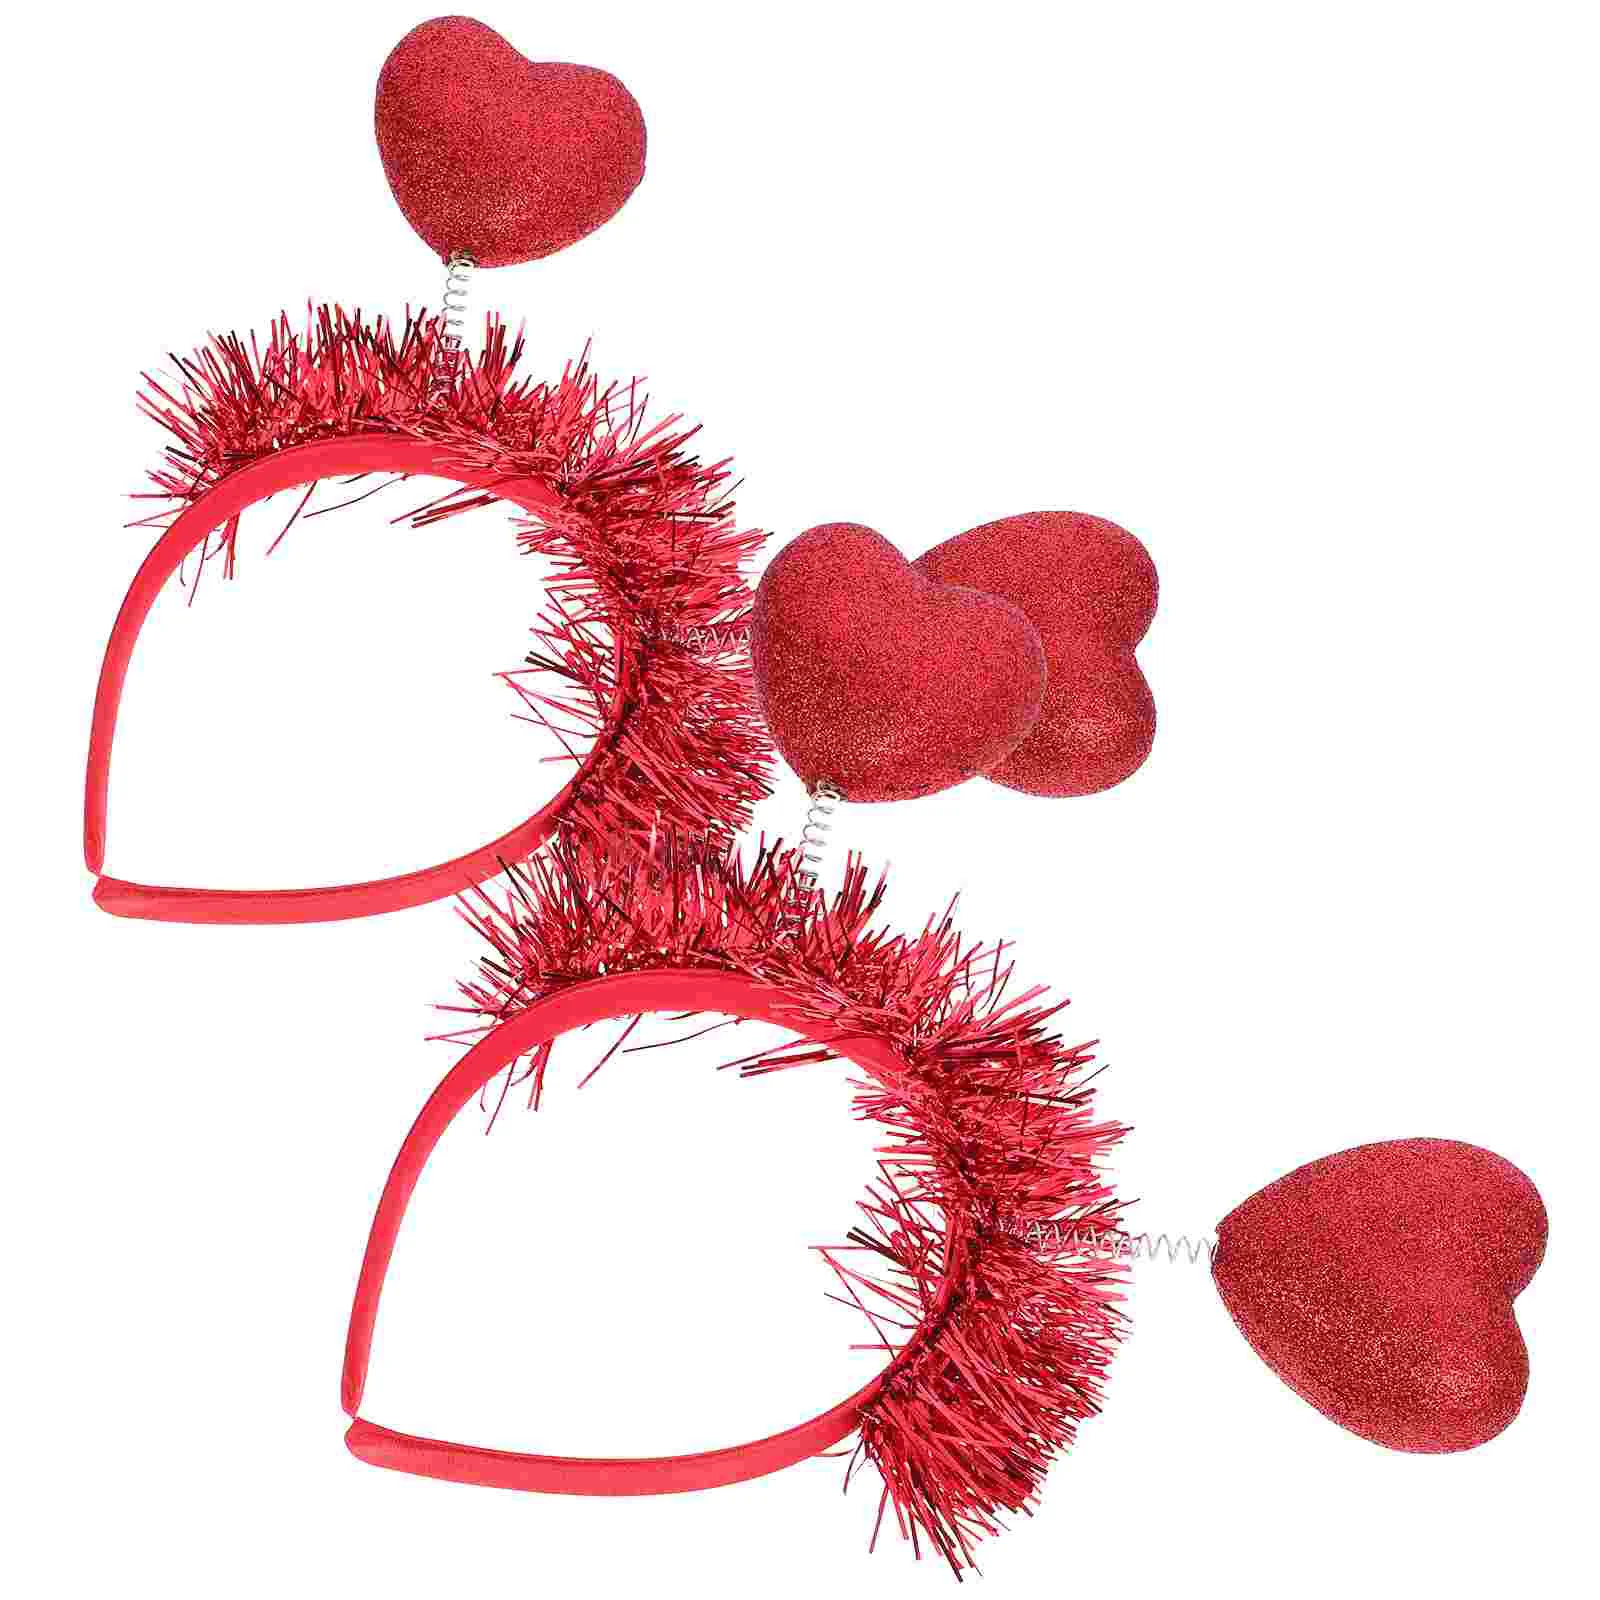 2 Pcs Love Headband Props Valentines Day Party Hairband Wedding Decorations Photography Headpiece Heart-shaped newborn baby boys photography props monopoly baby boy set gentleman outfits dollar diamond decorations blanket studio photo prop